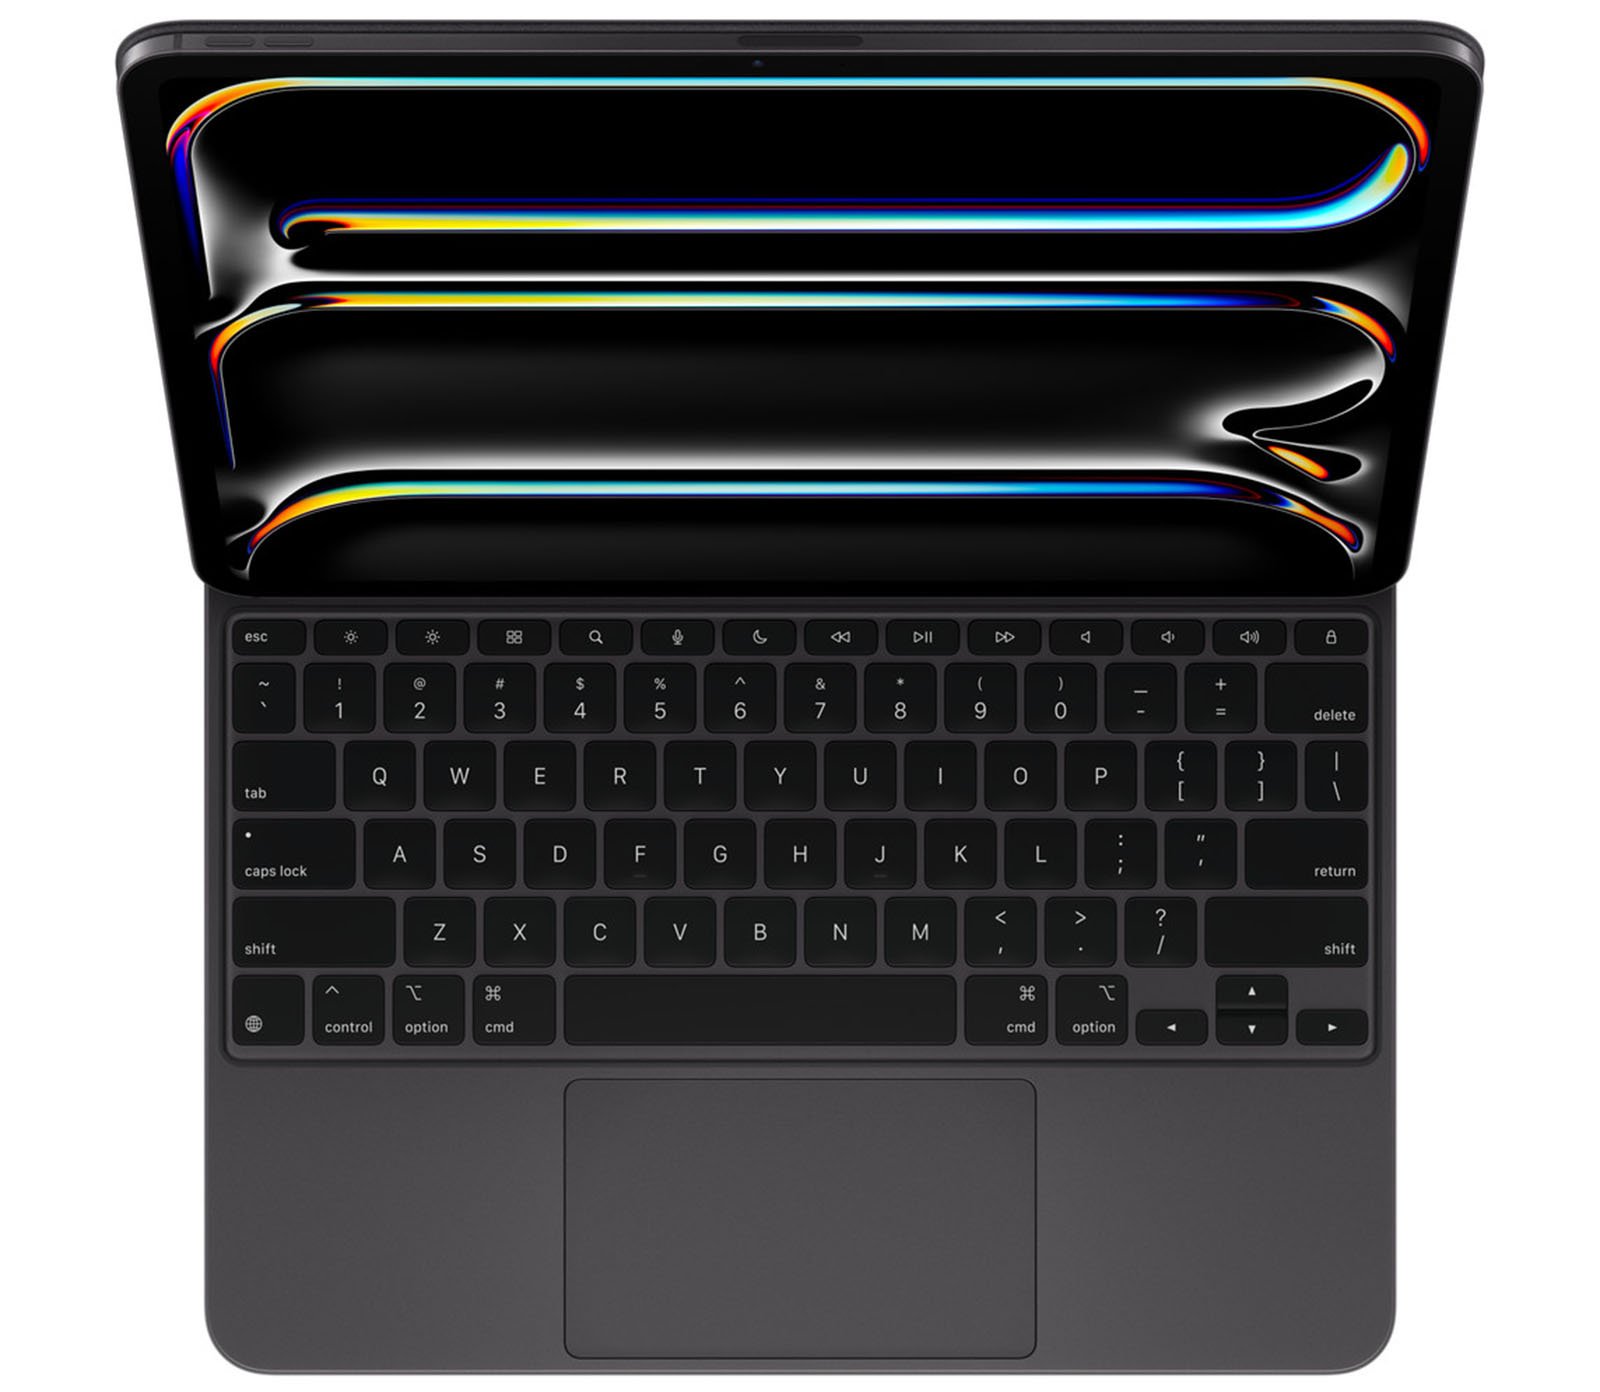 A modern laptop with a sleek design, featuring a black keyboard with visible keys and a touchpad. the screen displays colorful abstract lines.